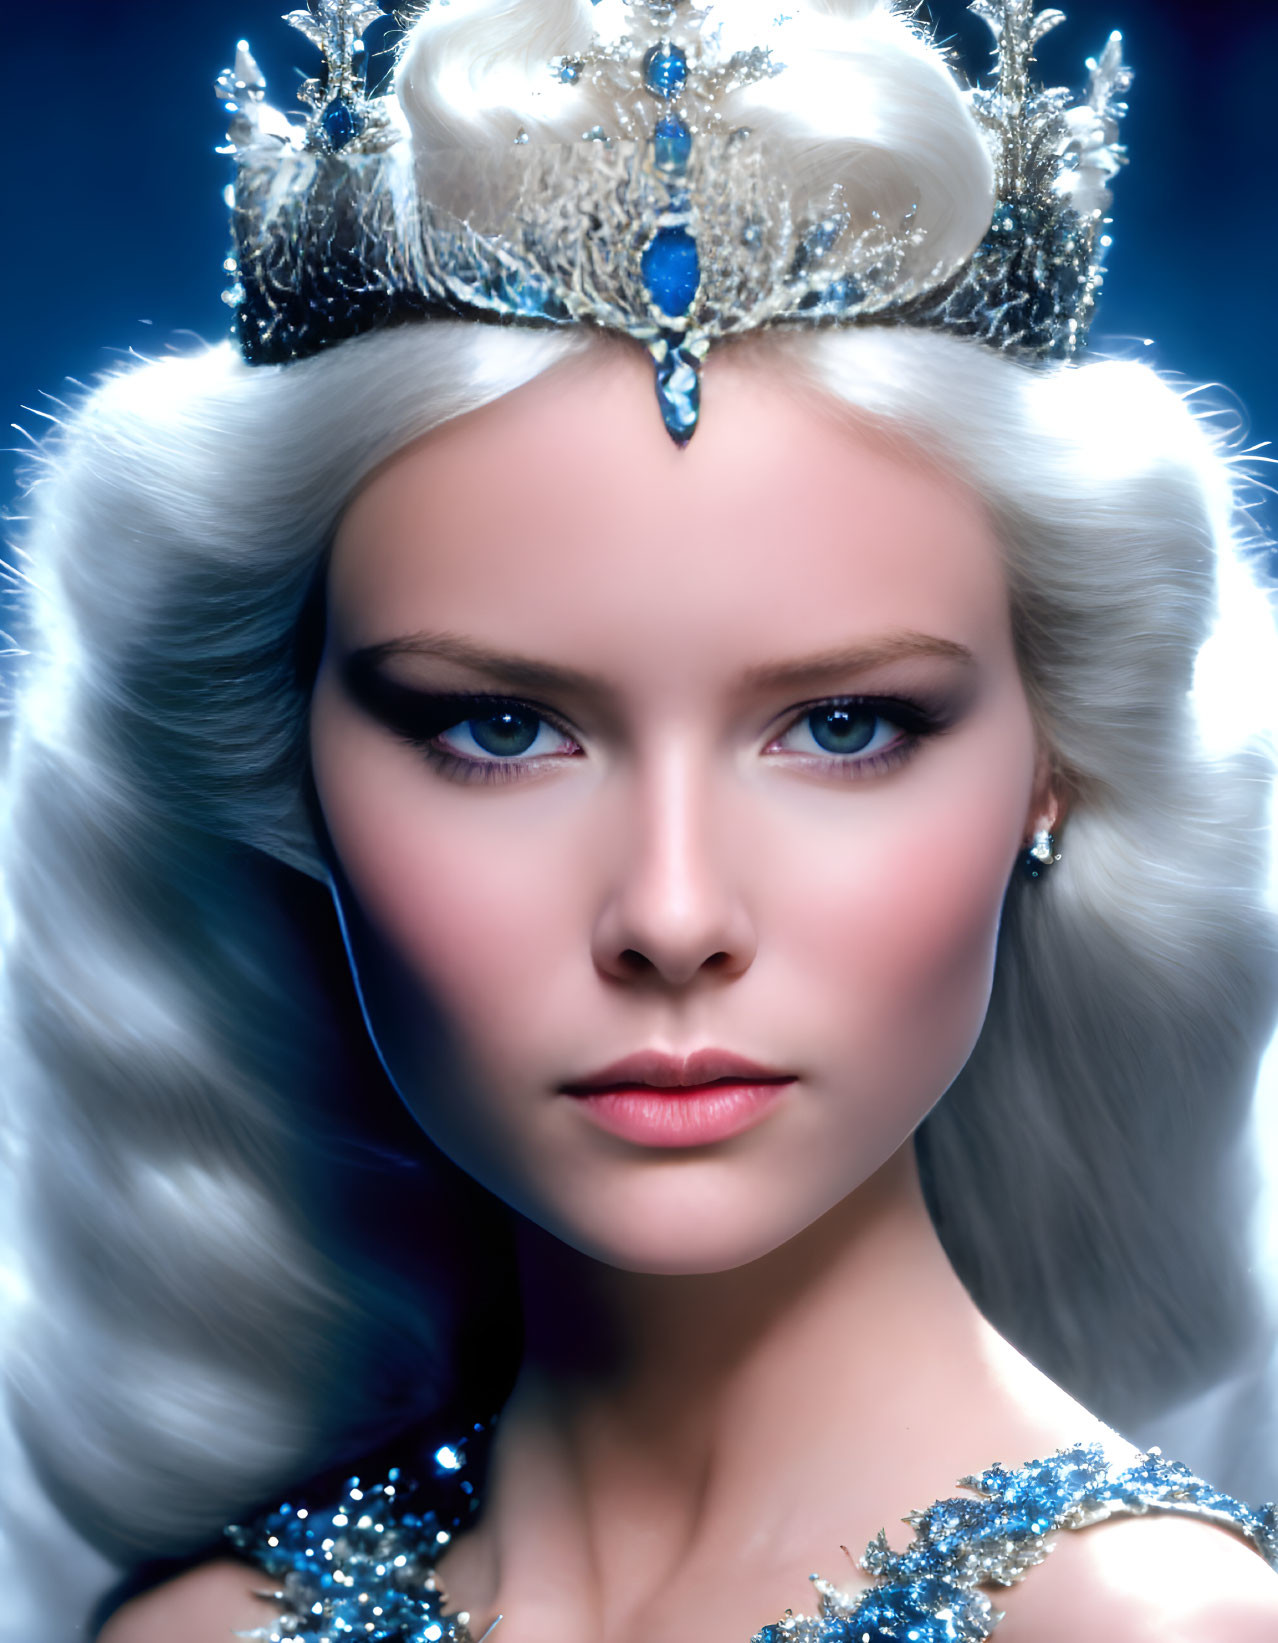 Woman with Blue Eyes in Silver Crown and Gem-Studded Blue Gown